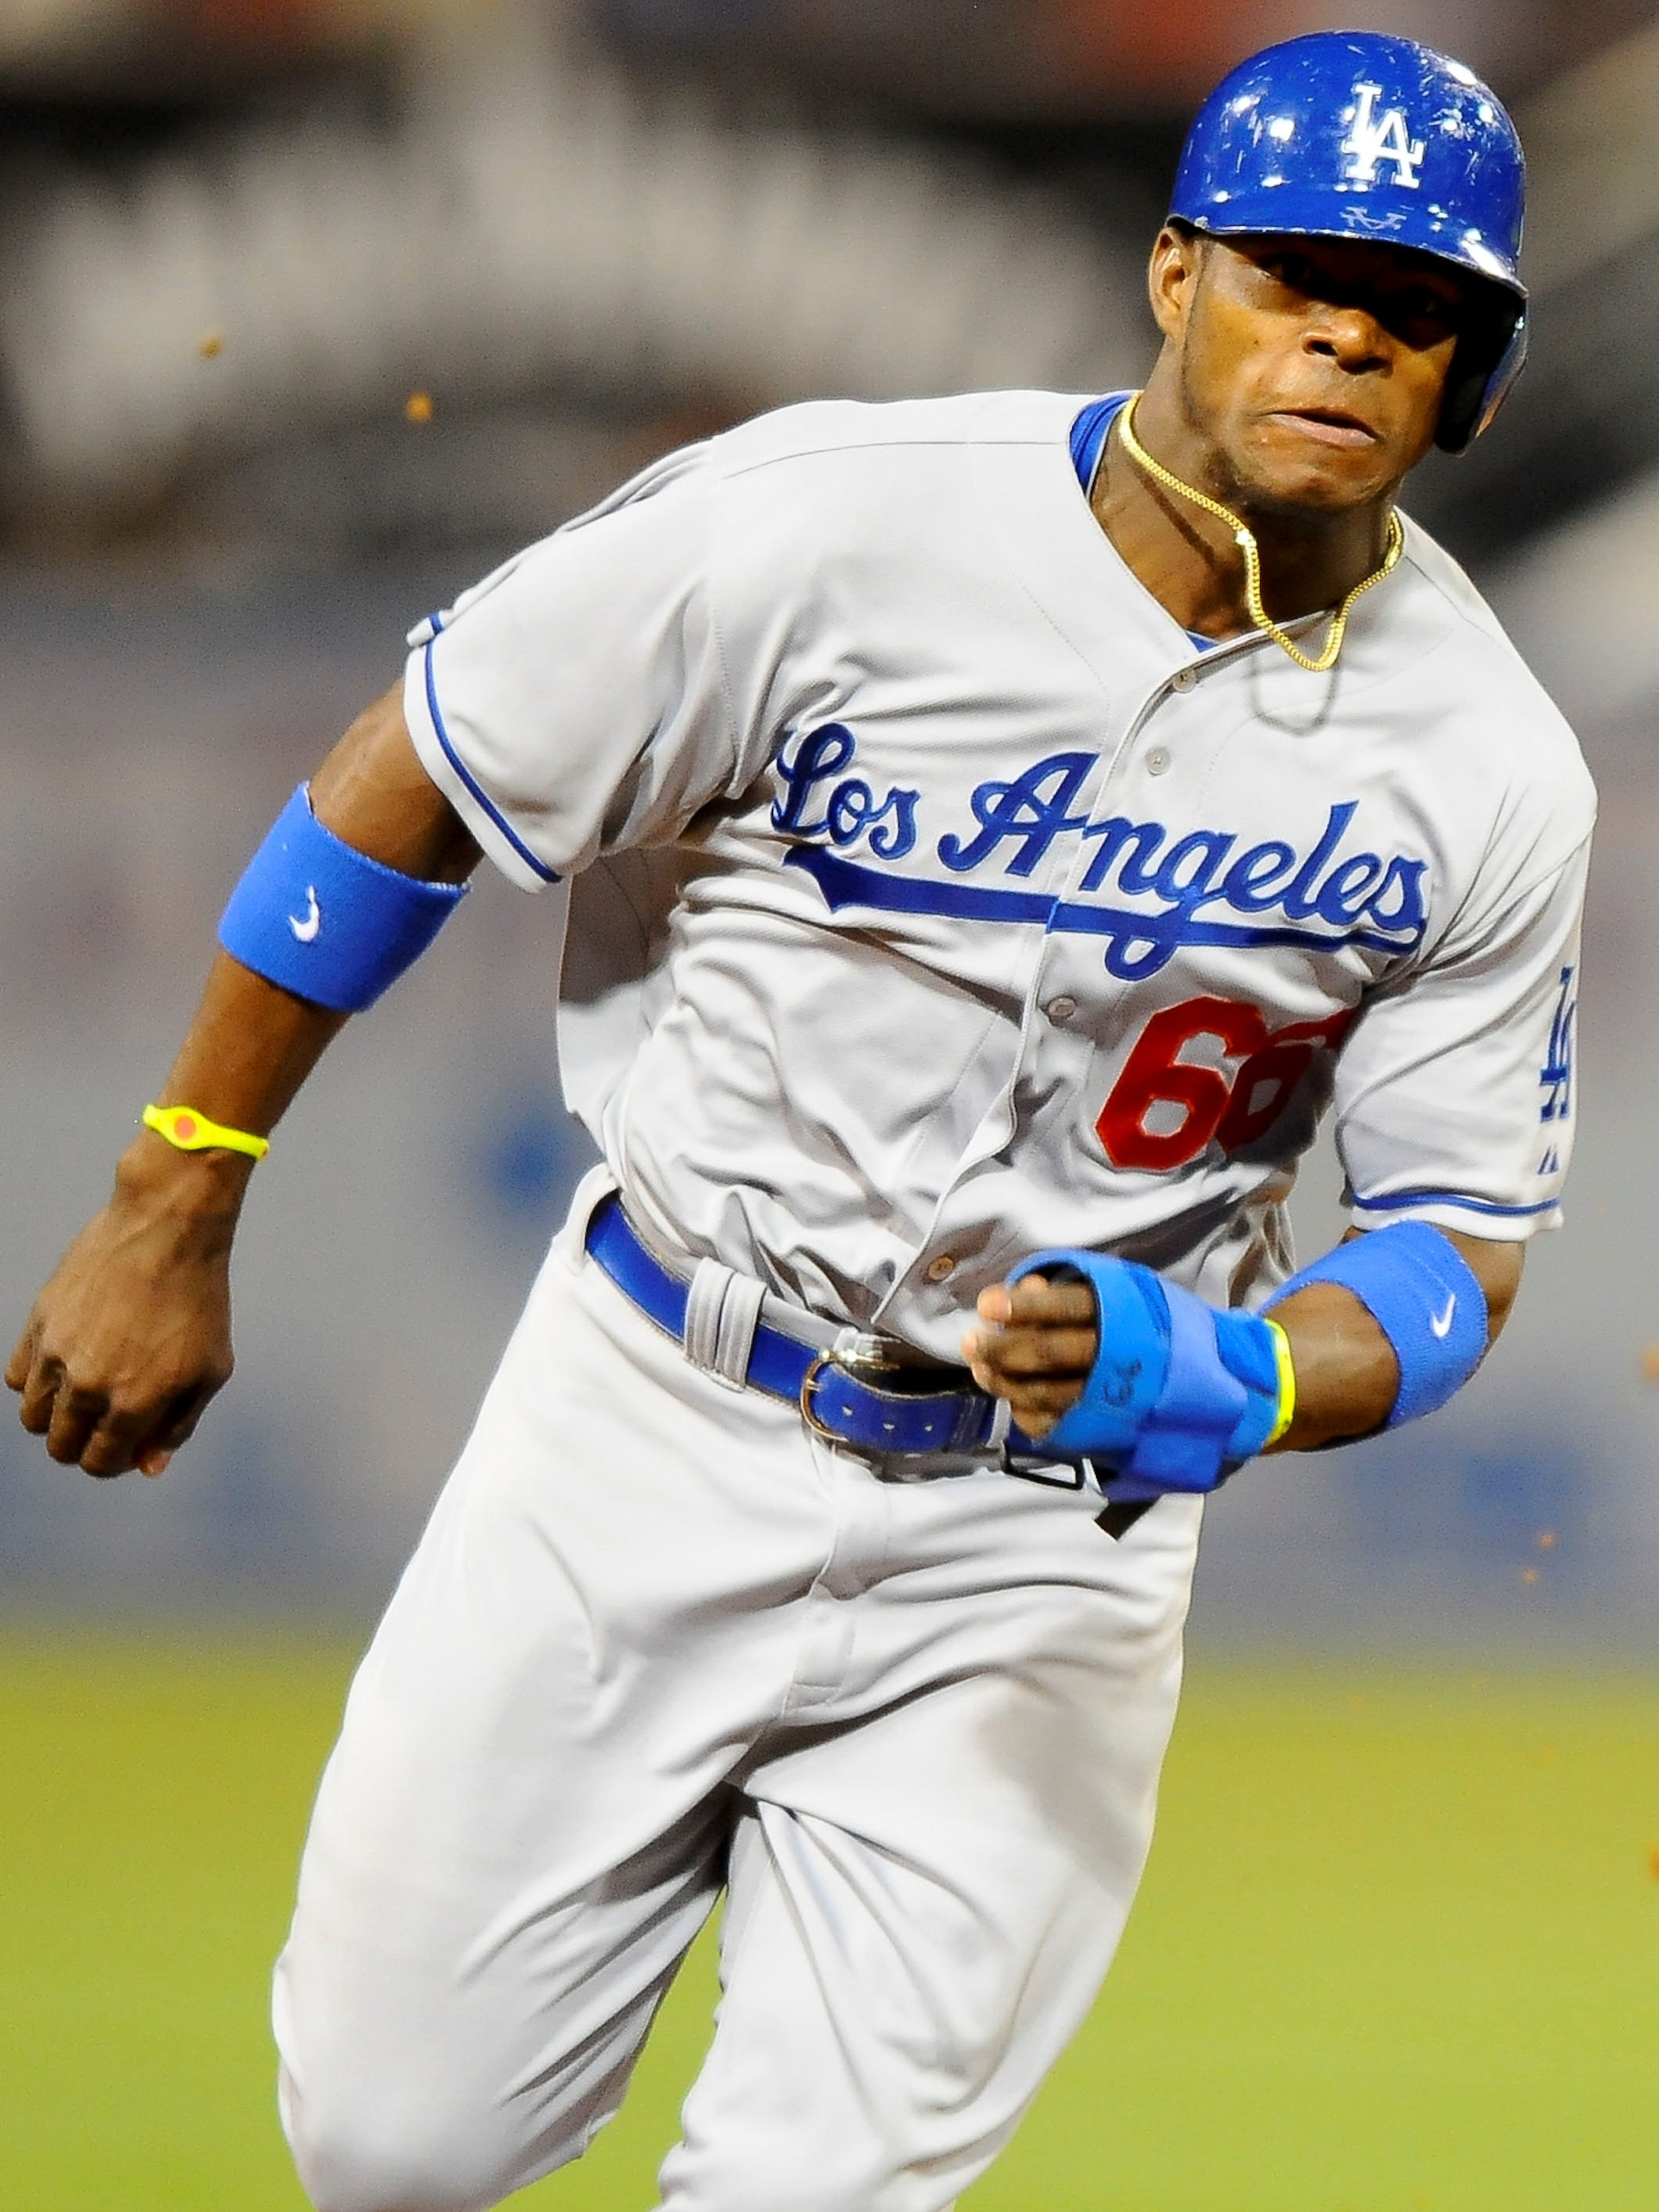 Yasiel Puig not selected for All-Star 